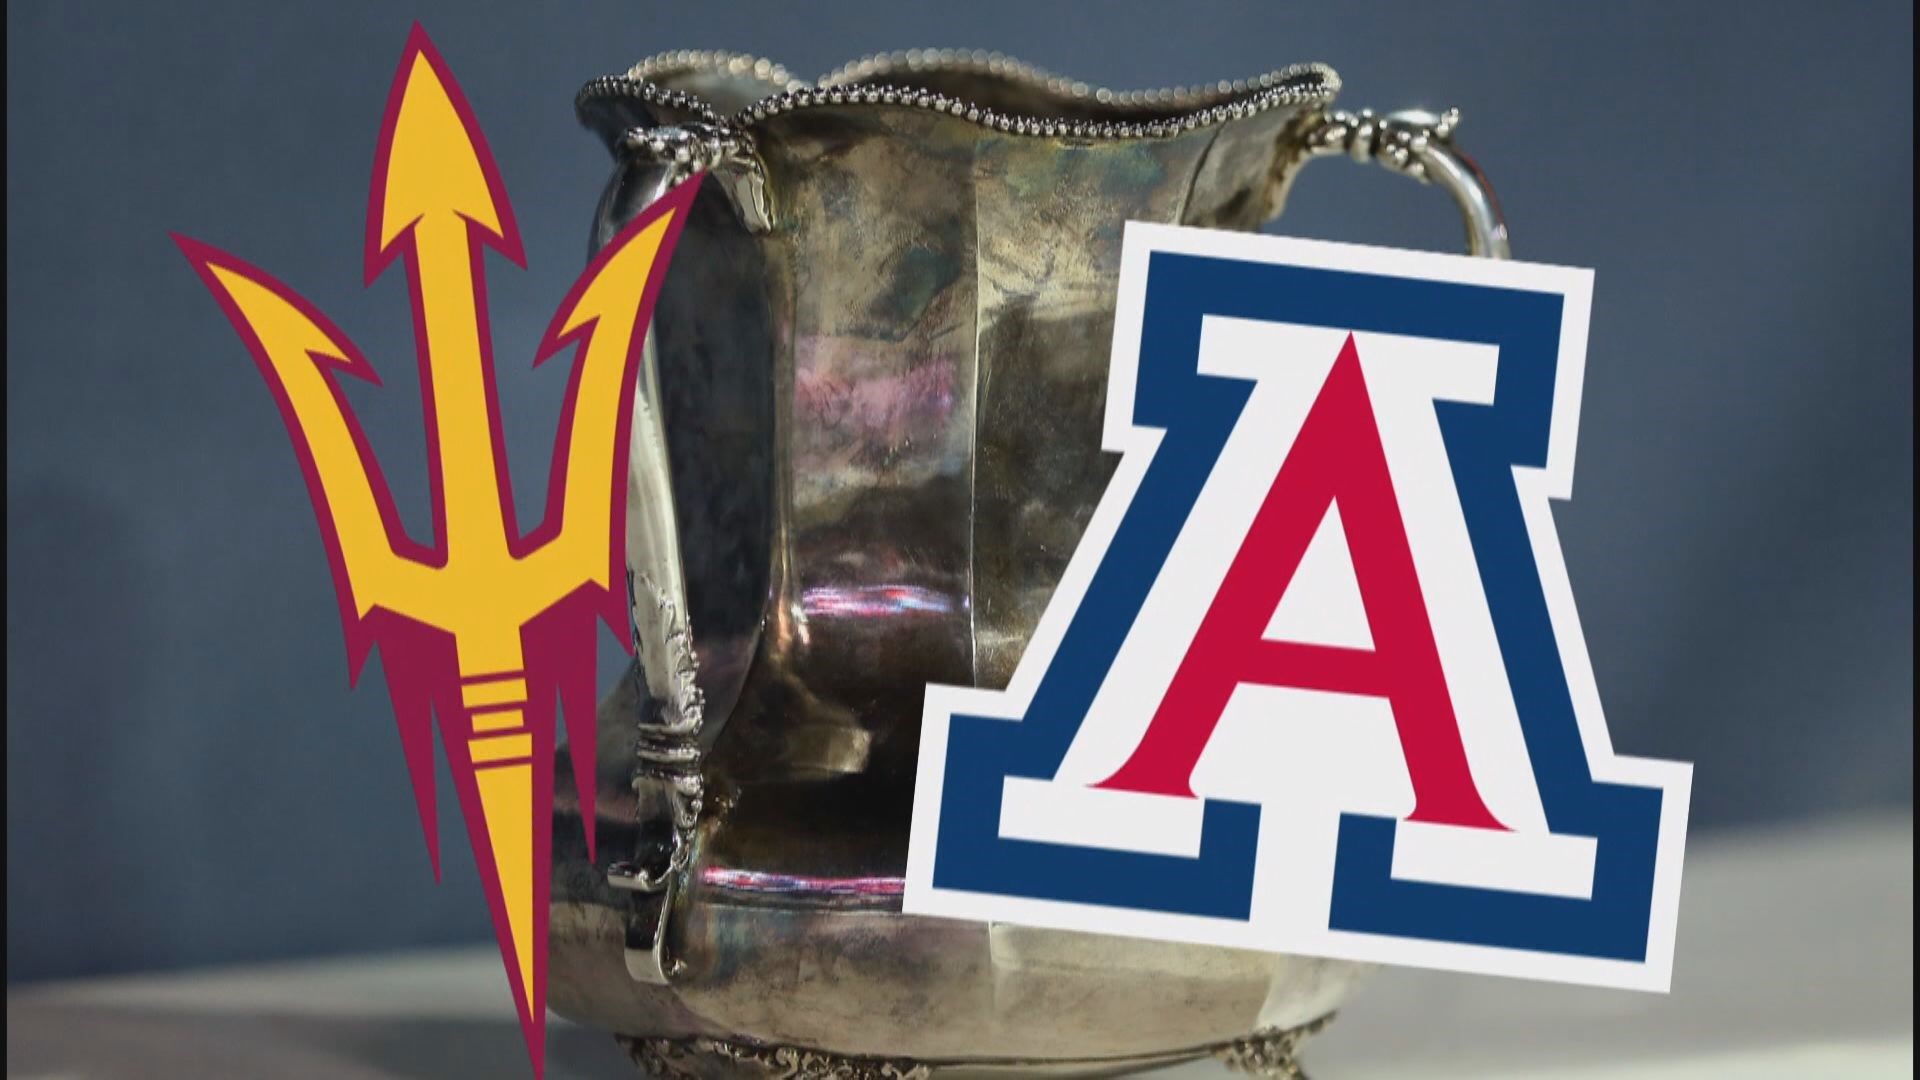 The rivalry between Arizona State and University of Arizona is older than the state itself.